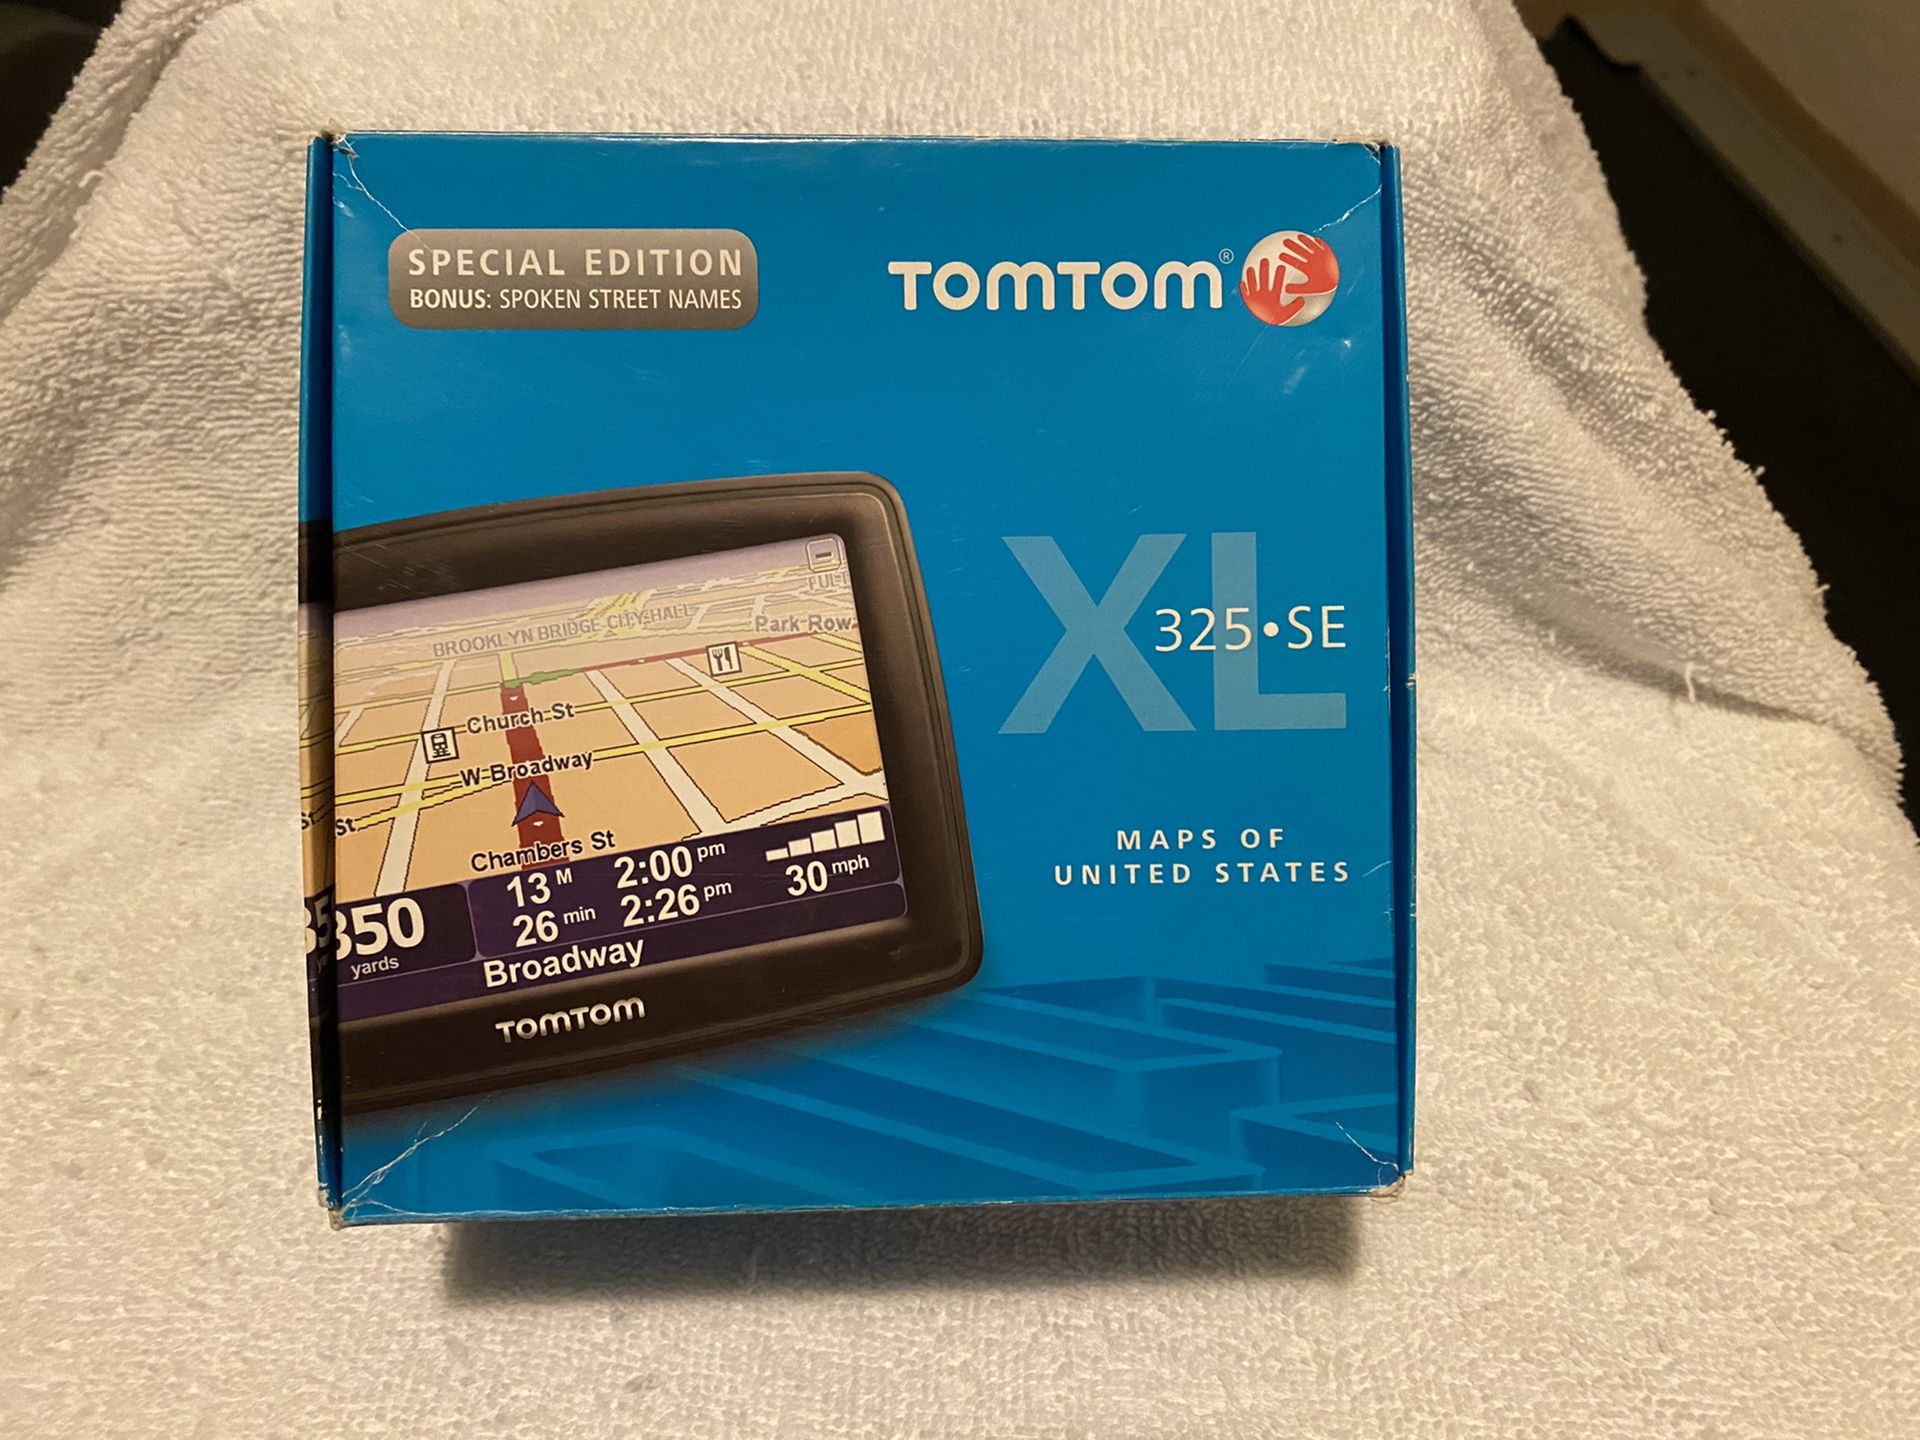 TOMTOM XL-325-SE ( SPECIAL EDITION)